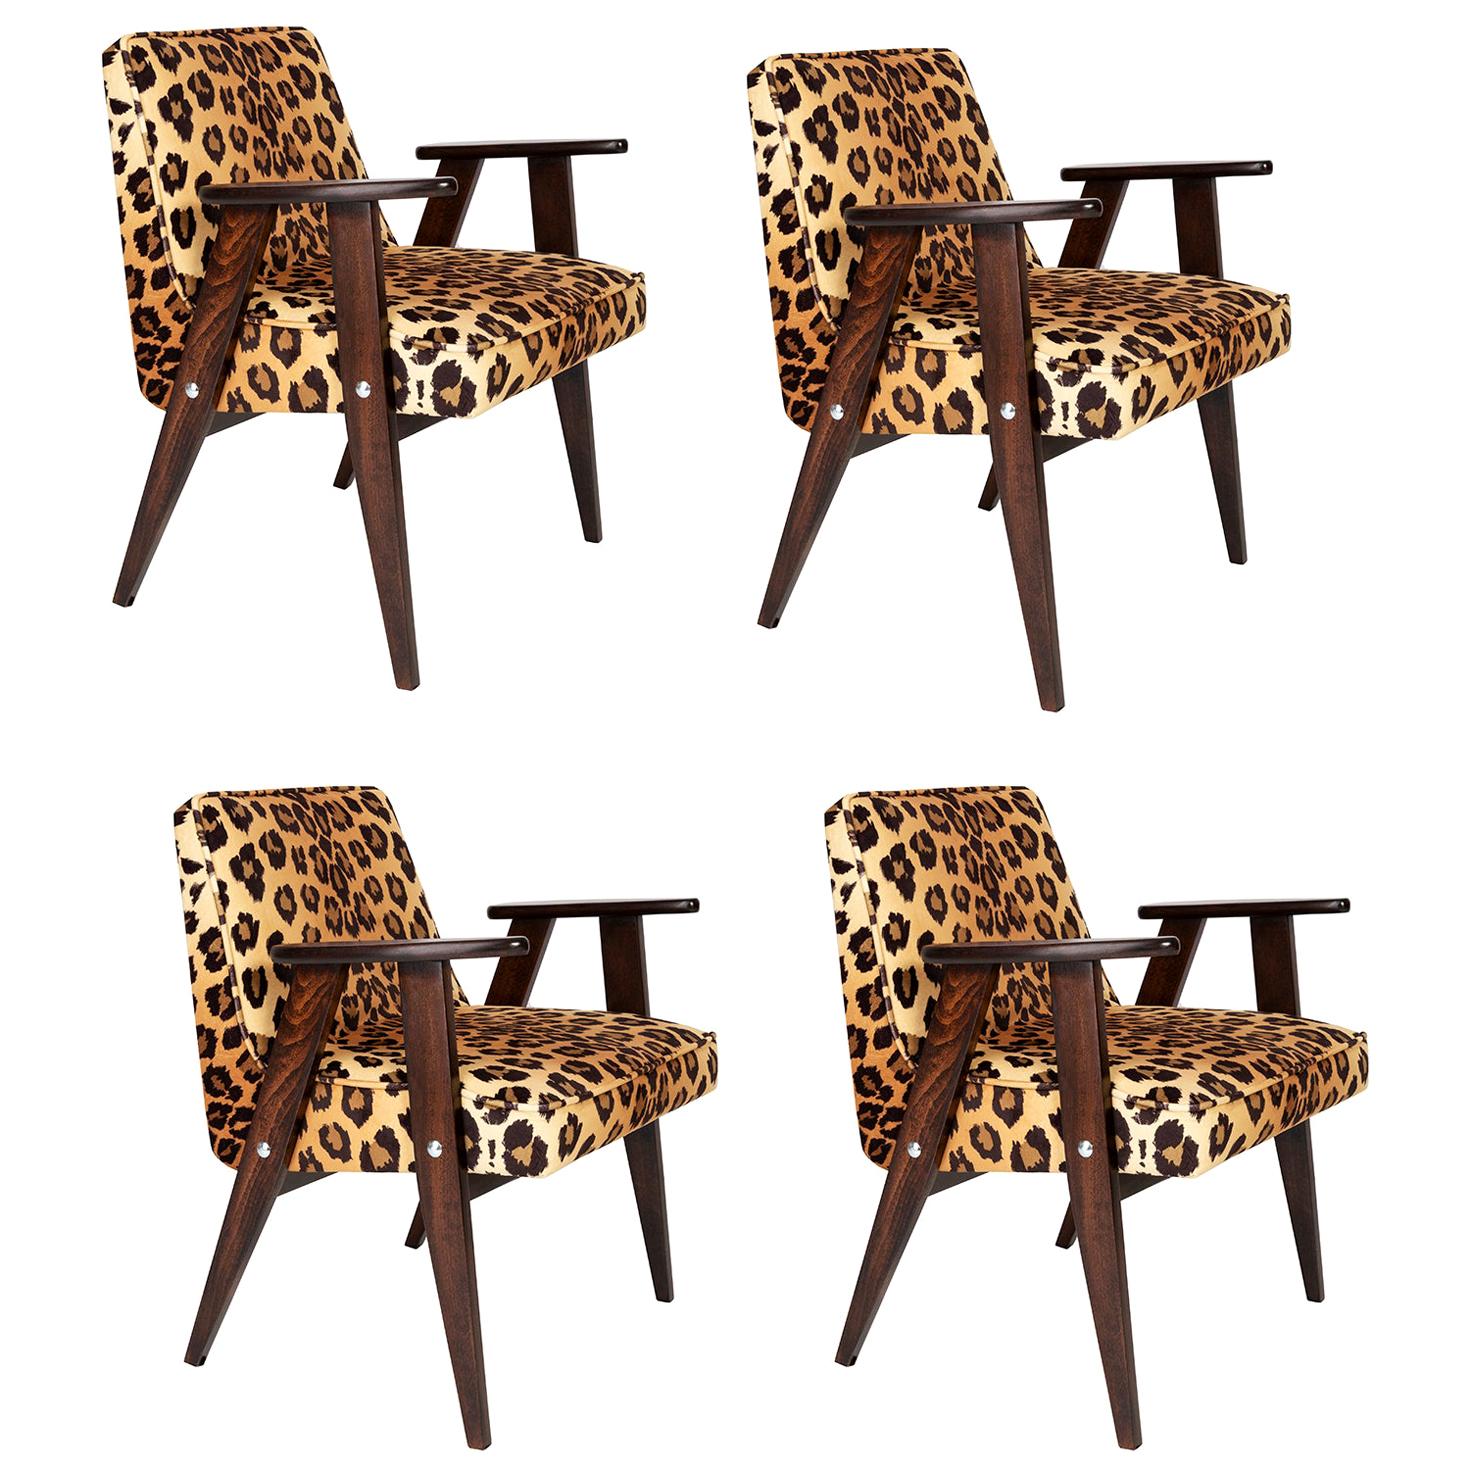 Four Midcentury 366 Armchairs in Leopard Print Velvet, Jozef Chierowski, 1960s For Sale